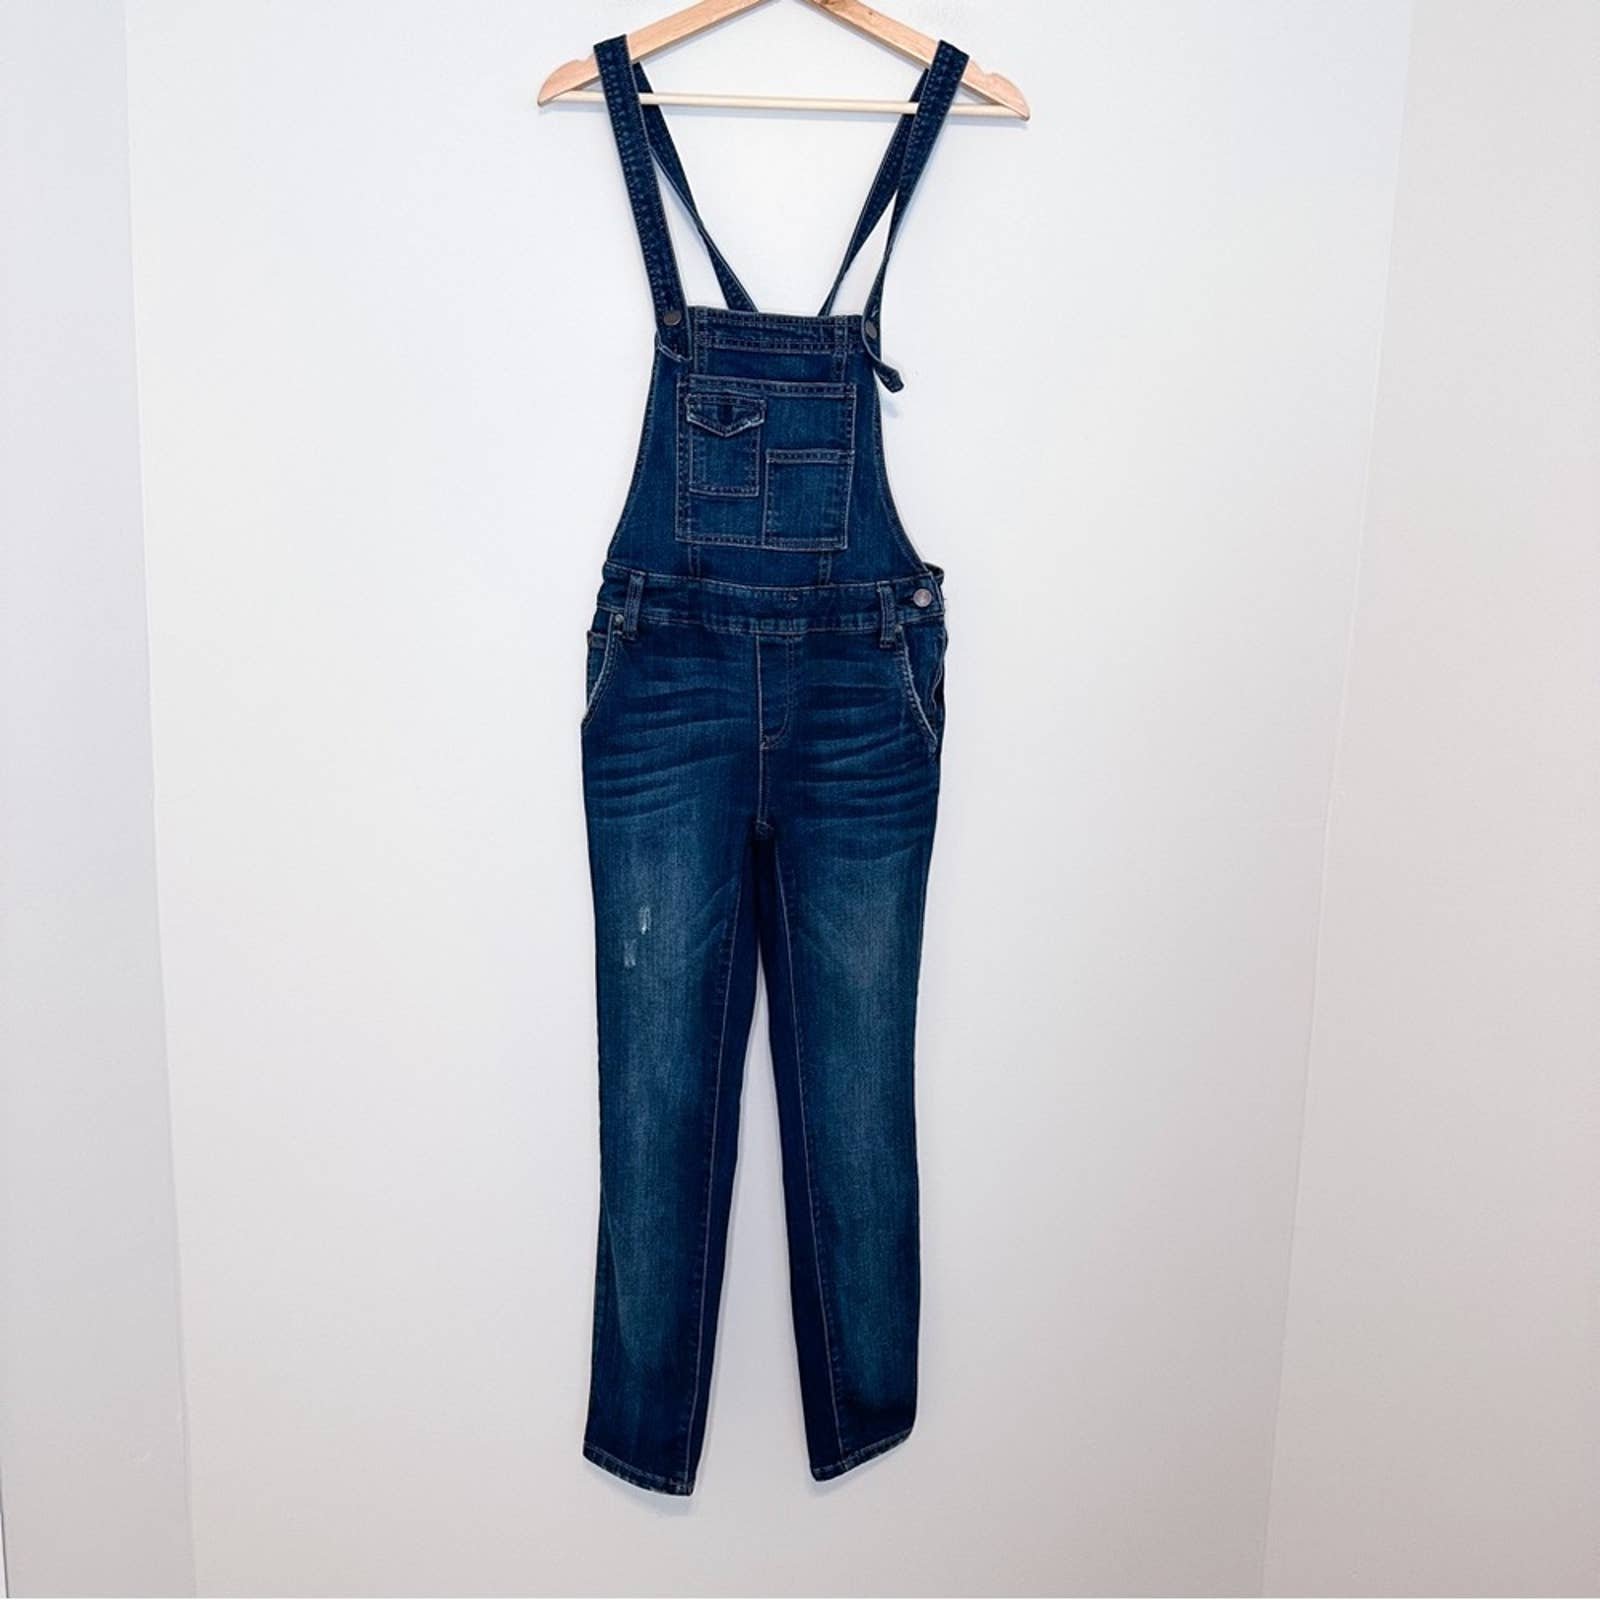 cheapest place to buy  Free People Overalls Jv3EFB4gz Counter Genuine 